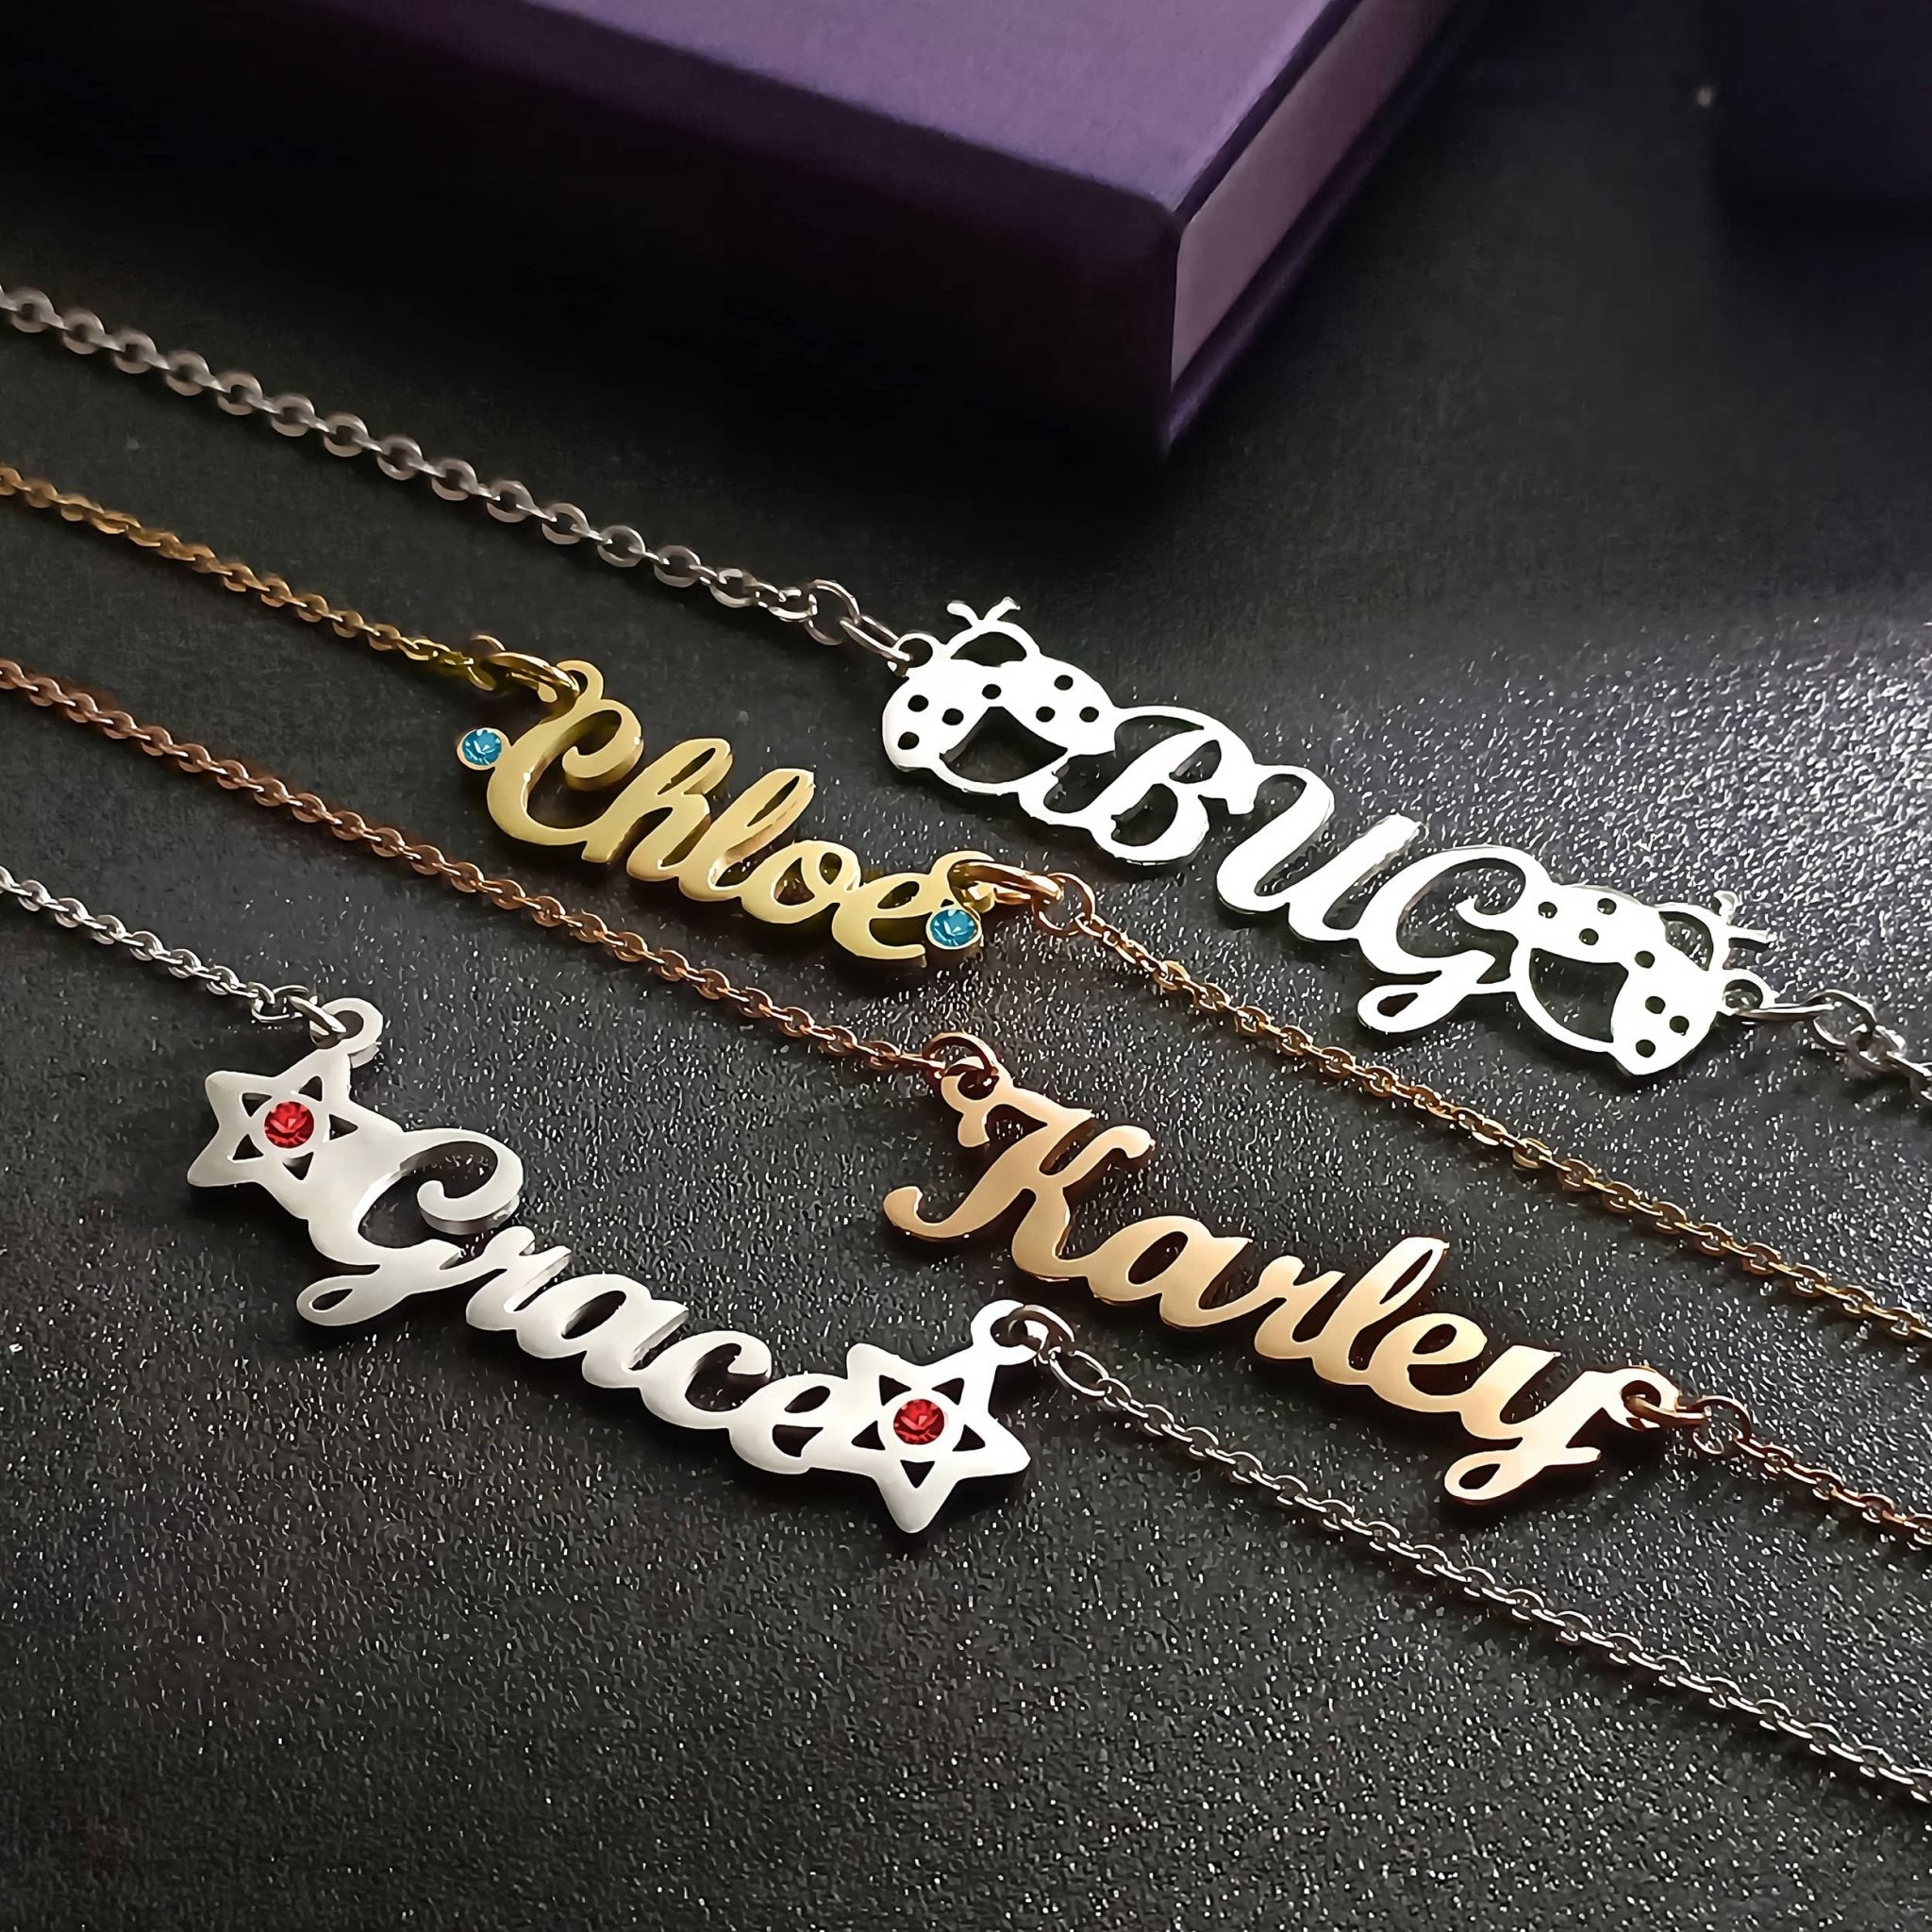 Personalised Name Necklace with Birthstone Options - Name Necklaces by Belle Fever